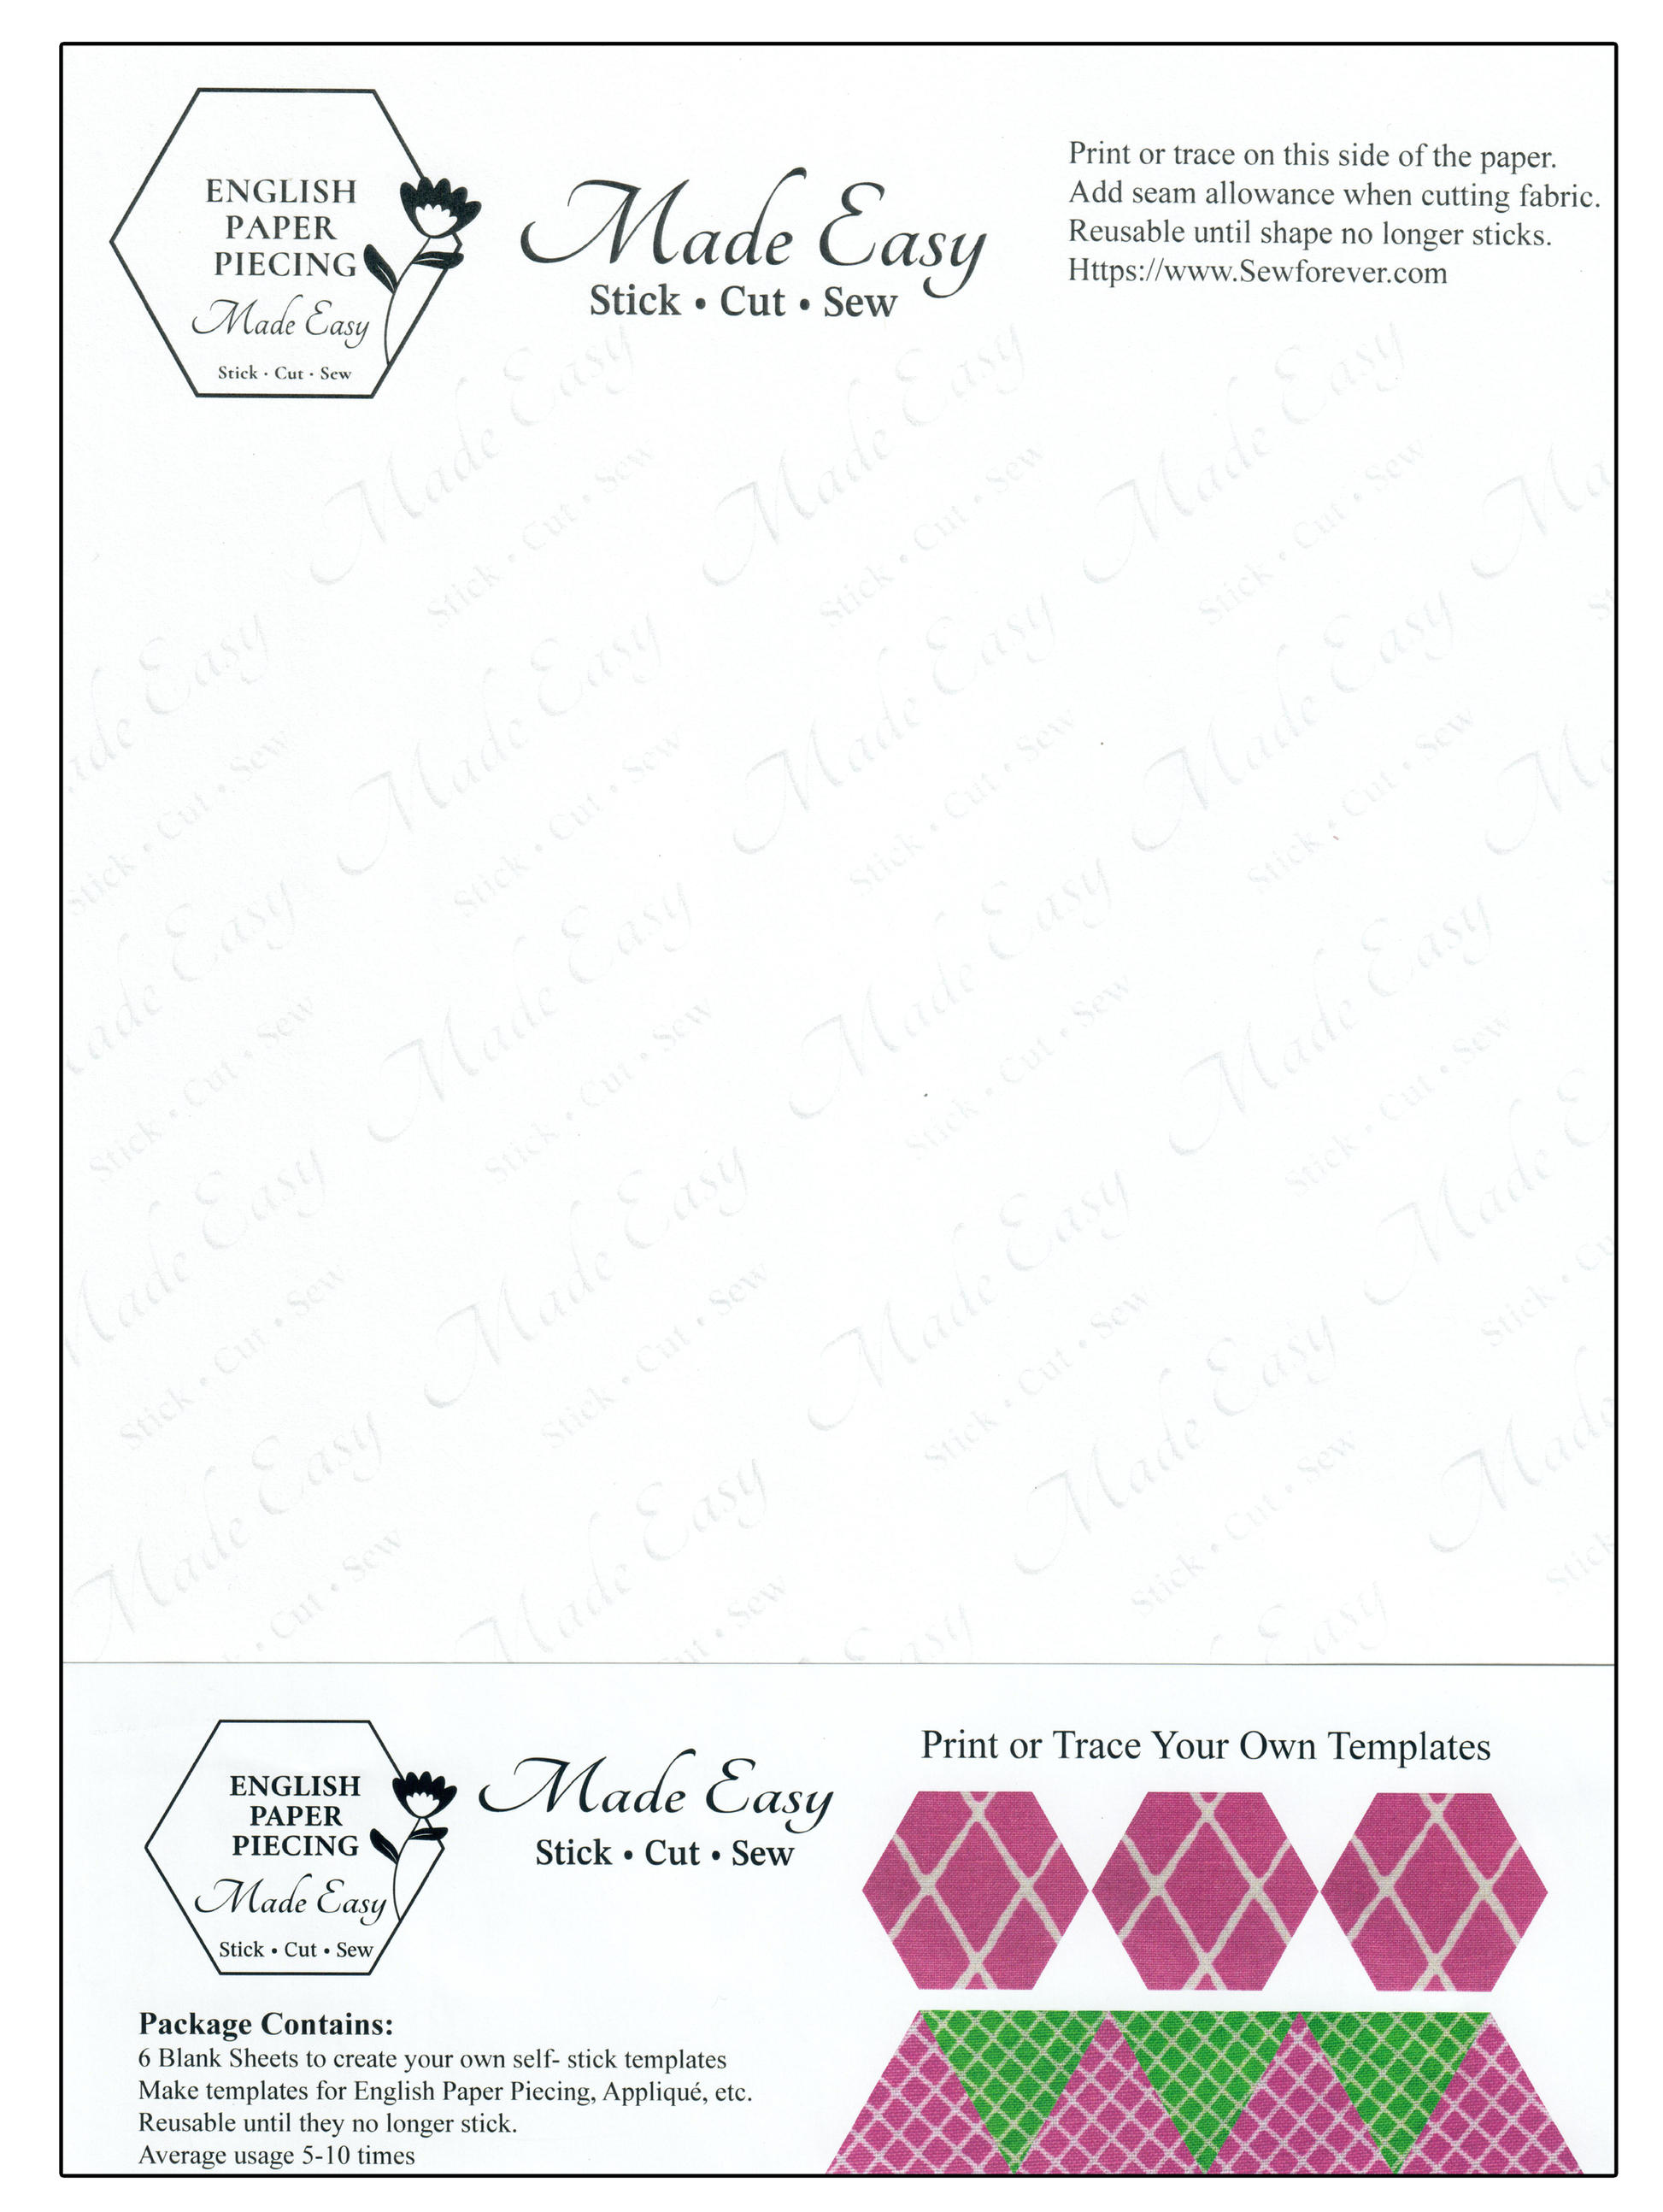 English Paper Piecing Made Easy Self-Stick templates that eliminate basting, gluing, whip-stitching anad pulling paper